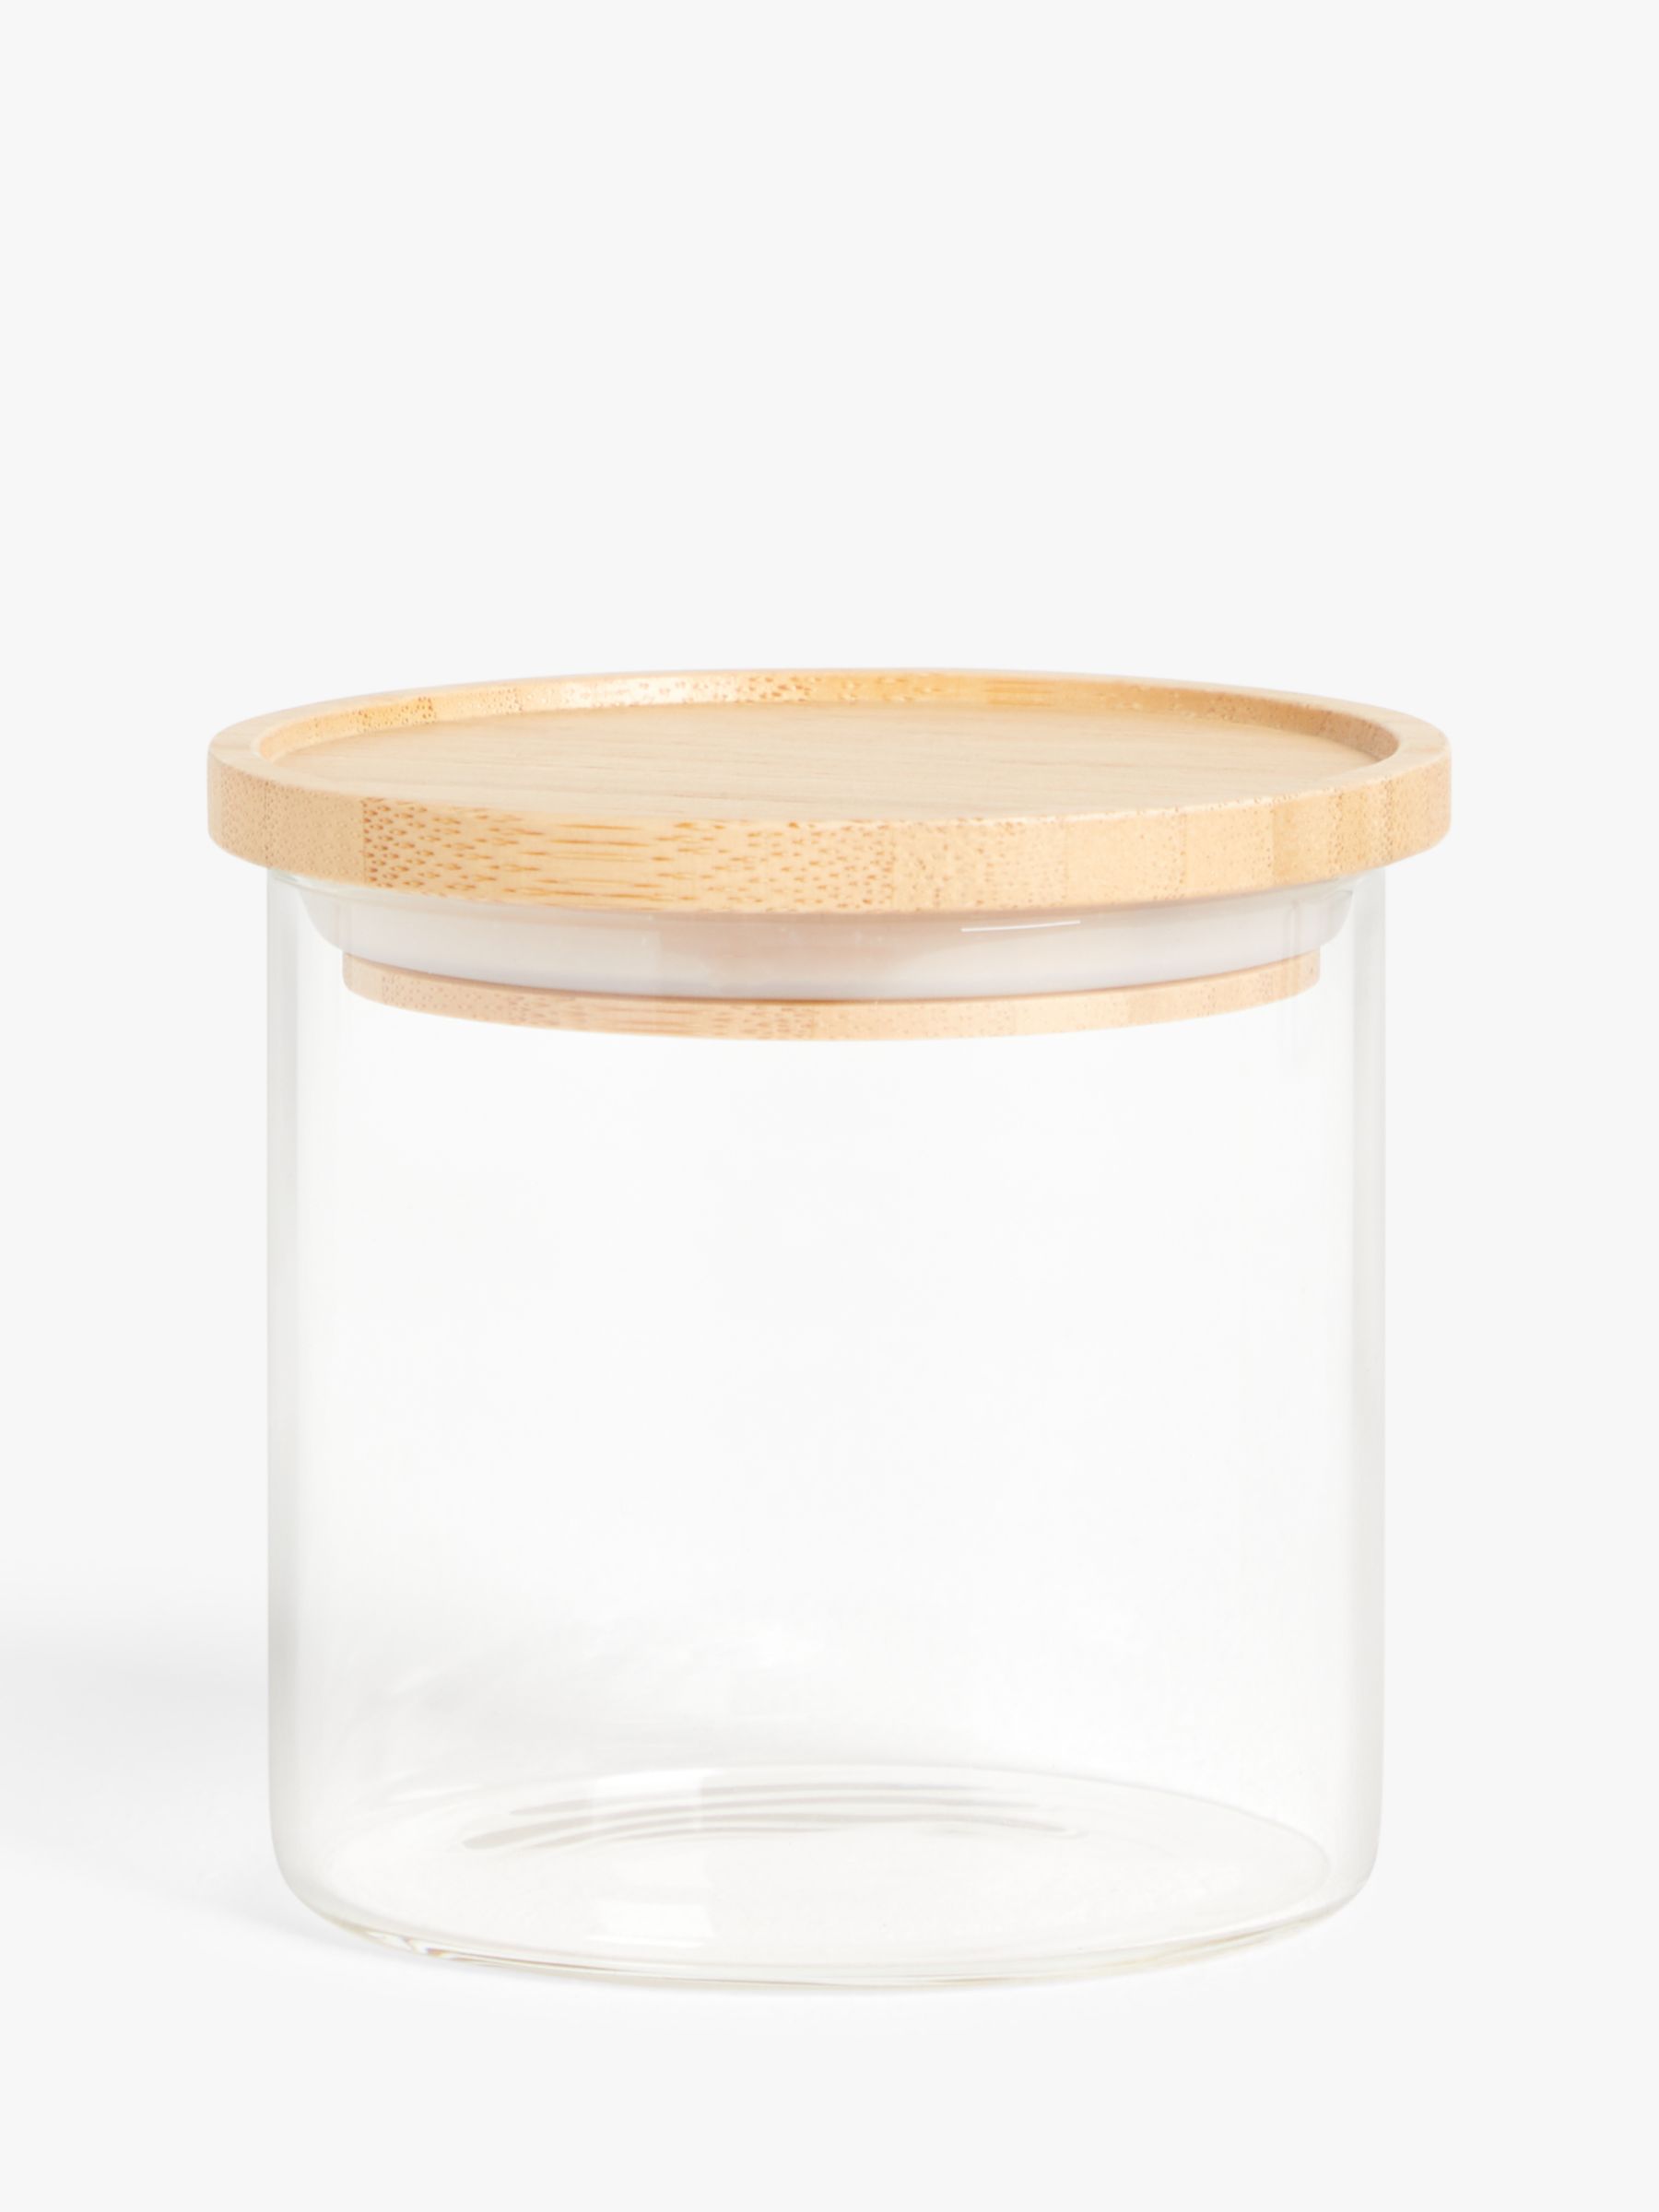 Large Size Glassware Home Storage Jar with Bamboo Lid - China